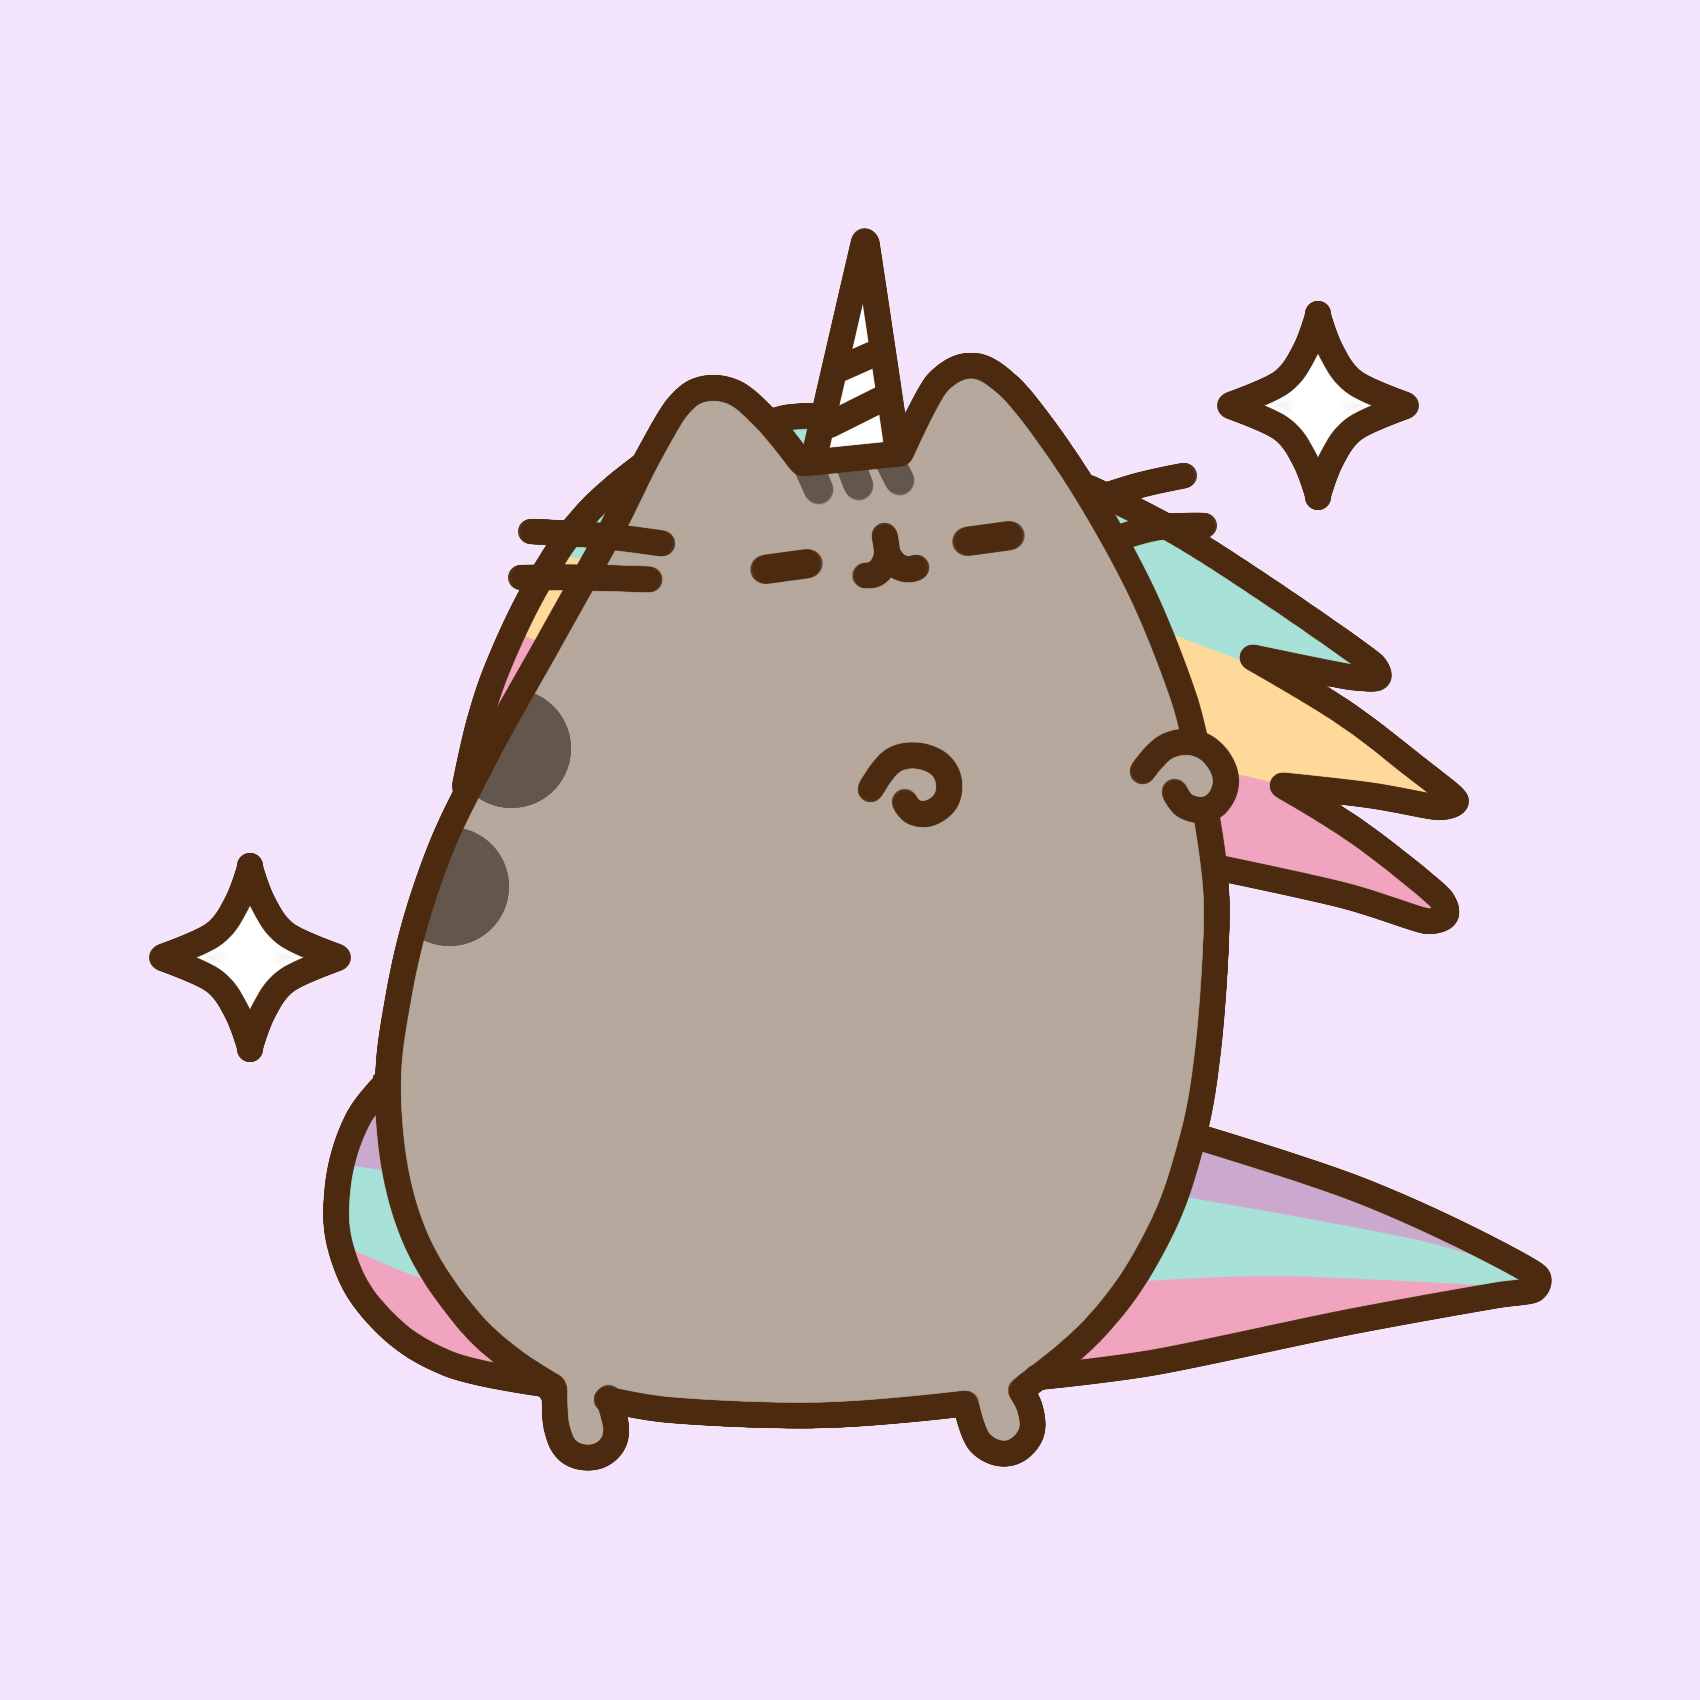 Best Images About Pusheen On Pinterest Cats Plush And Pusheen Gif | My ...